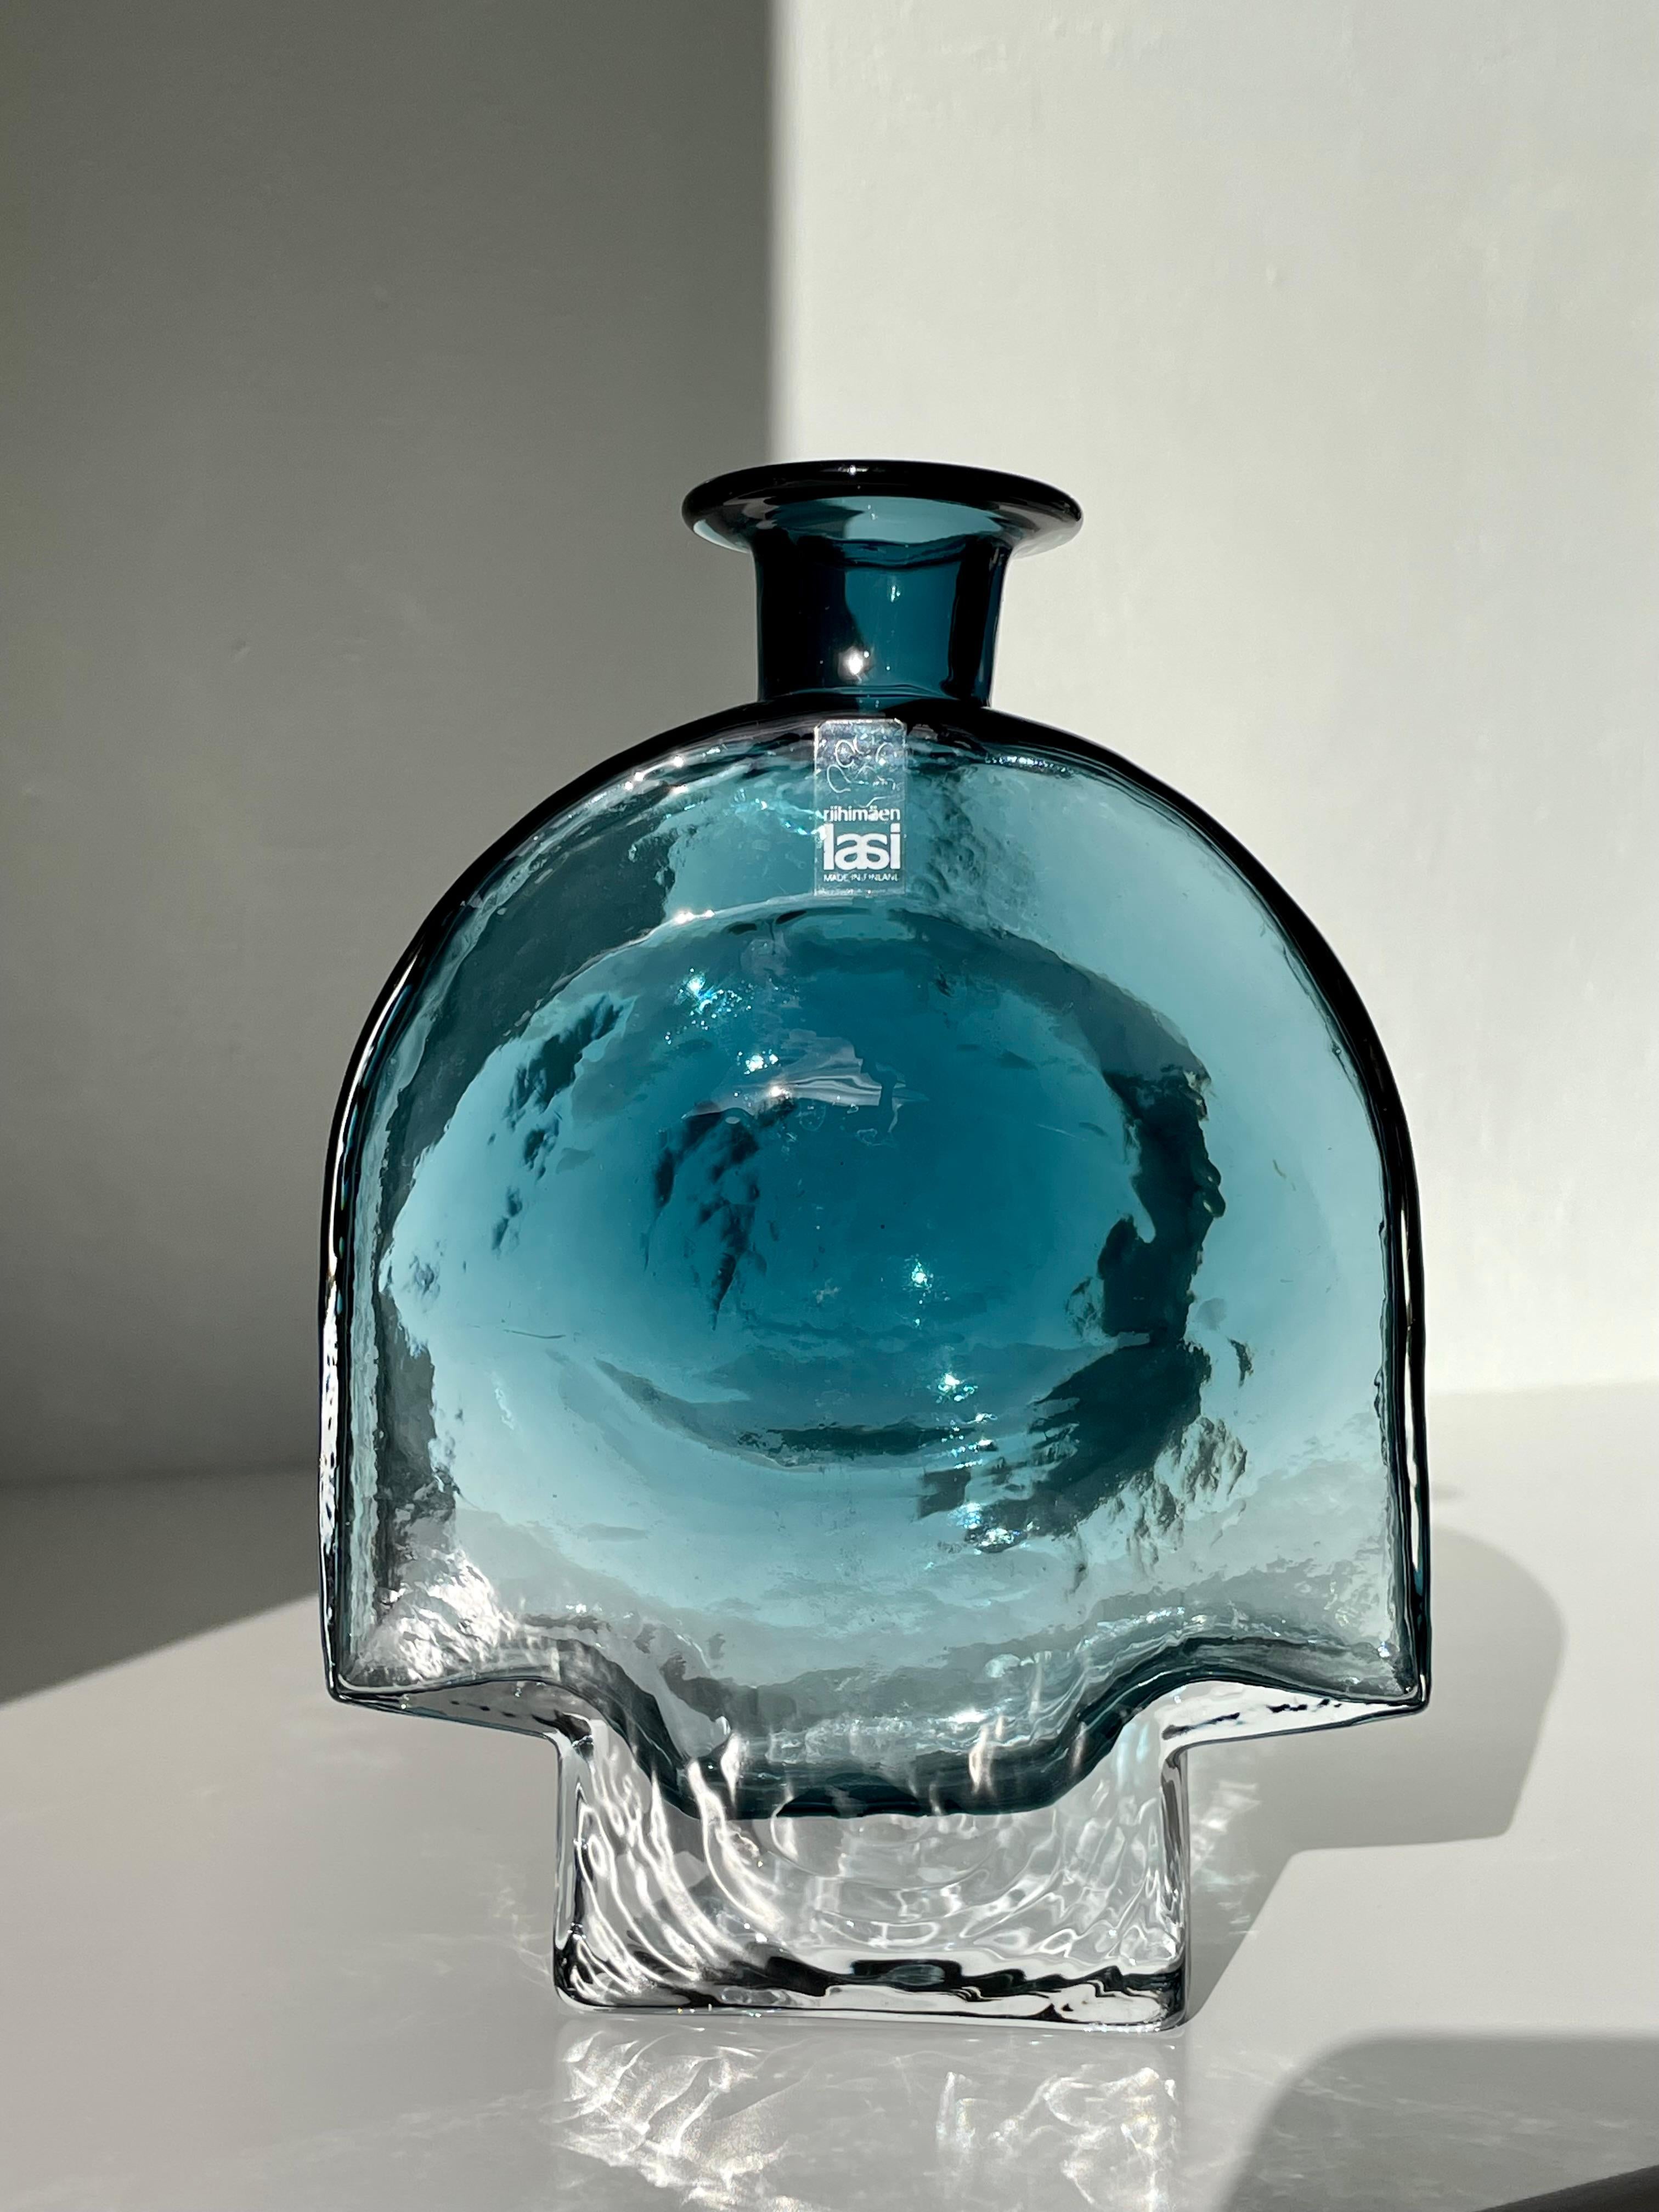 Exceptional handmade art glass vase by artist Helena Tynell for Riihimäen Lasi in the early 1970s. Transparent dusty aqua blue underlay encased in clear glass in an architectural and complex form consisting of round and angled shapes. Original label